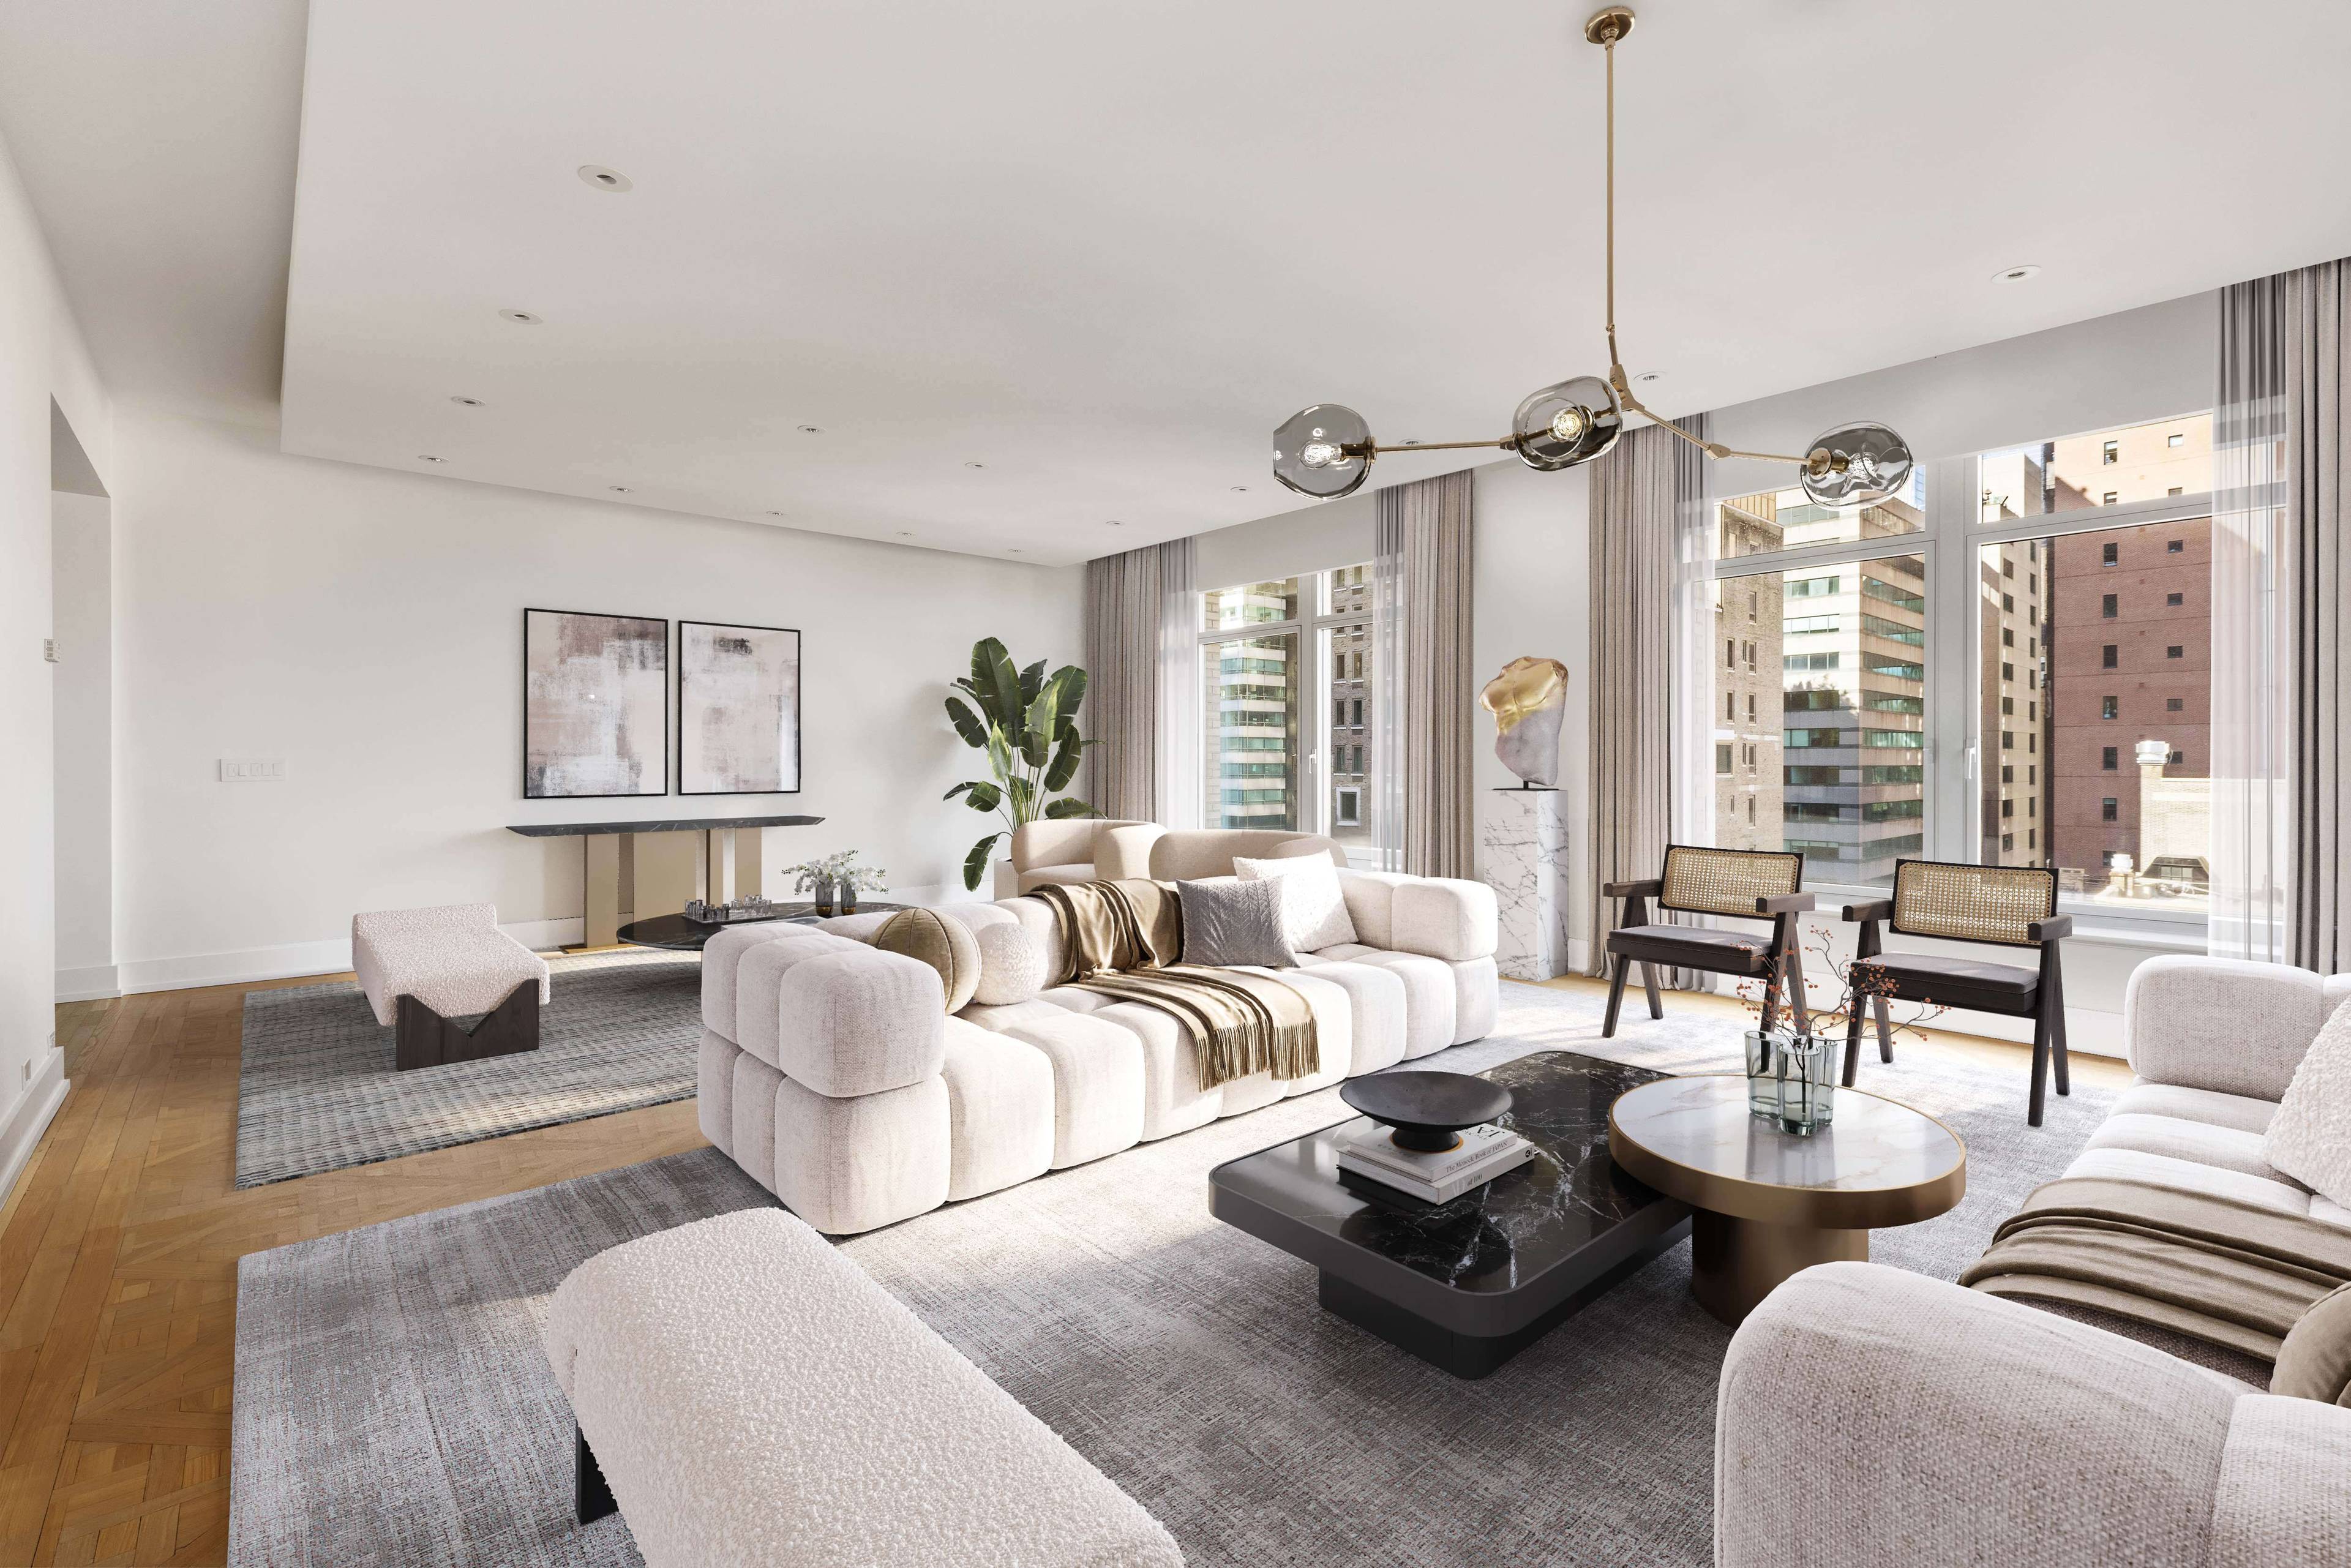 Spanning over 3, 257 square feet, Residence 19 occupies the northwest side of the 19th floor and features grand prewar scale, high ceilings, and large windows facing Central Park with ...